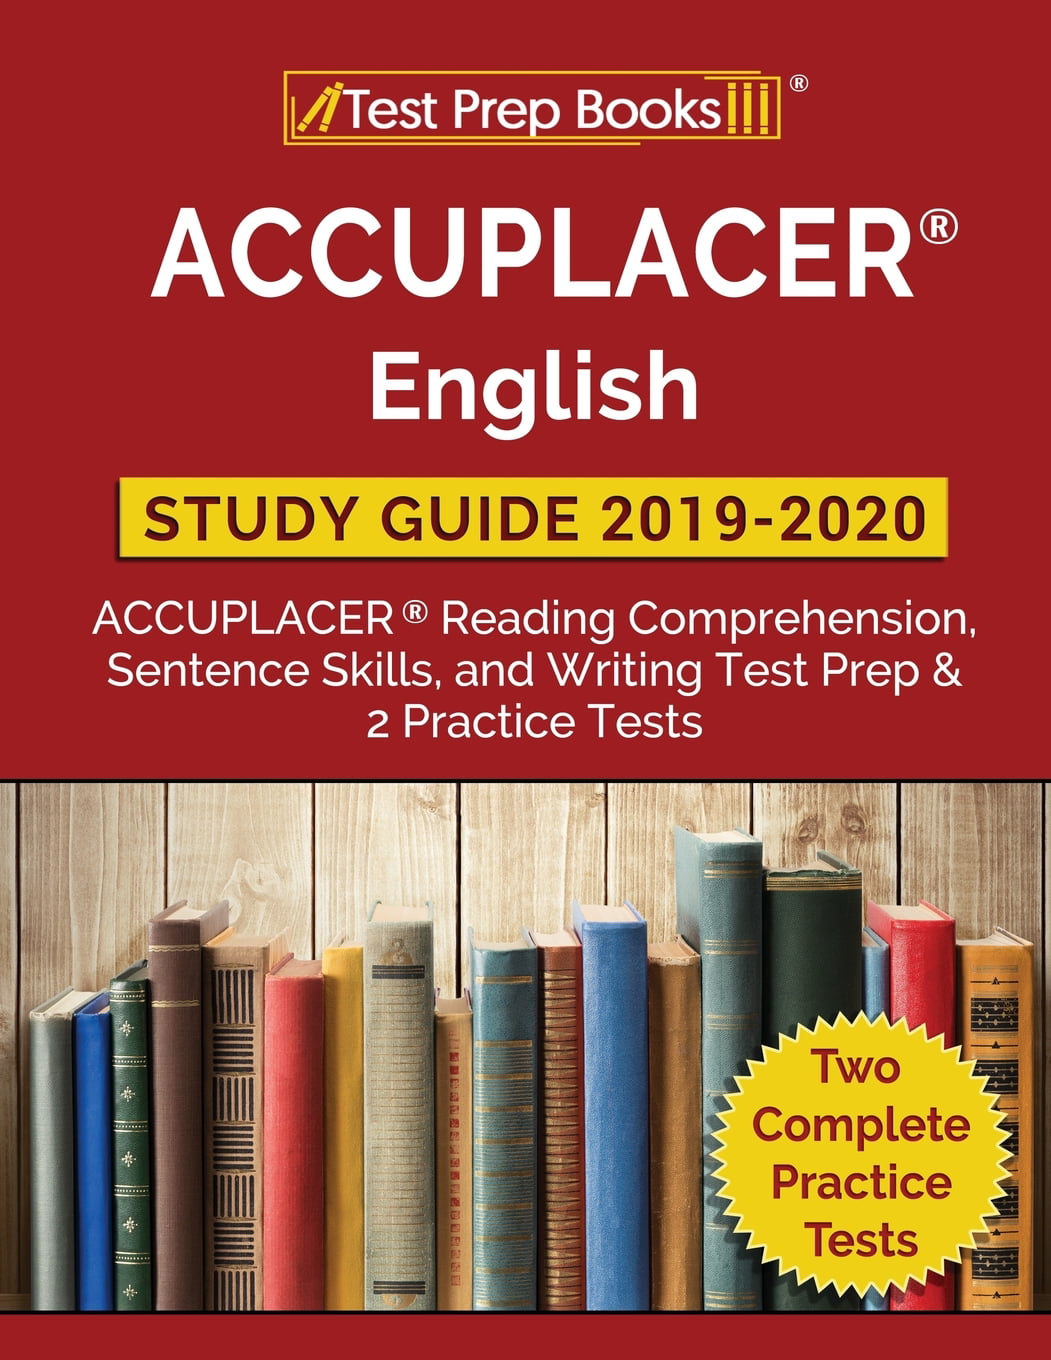 accuplacer-english-study-guide-2019-2020-accuplacer-reading-comprehension-sentence-skills